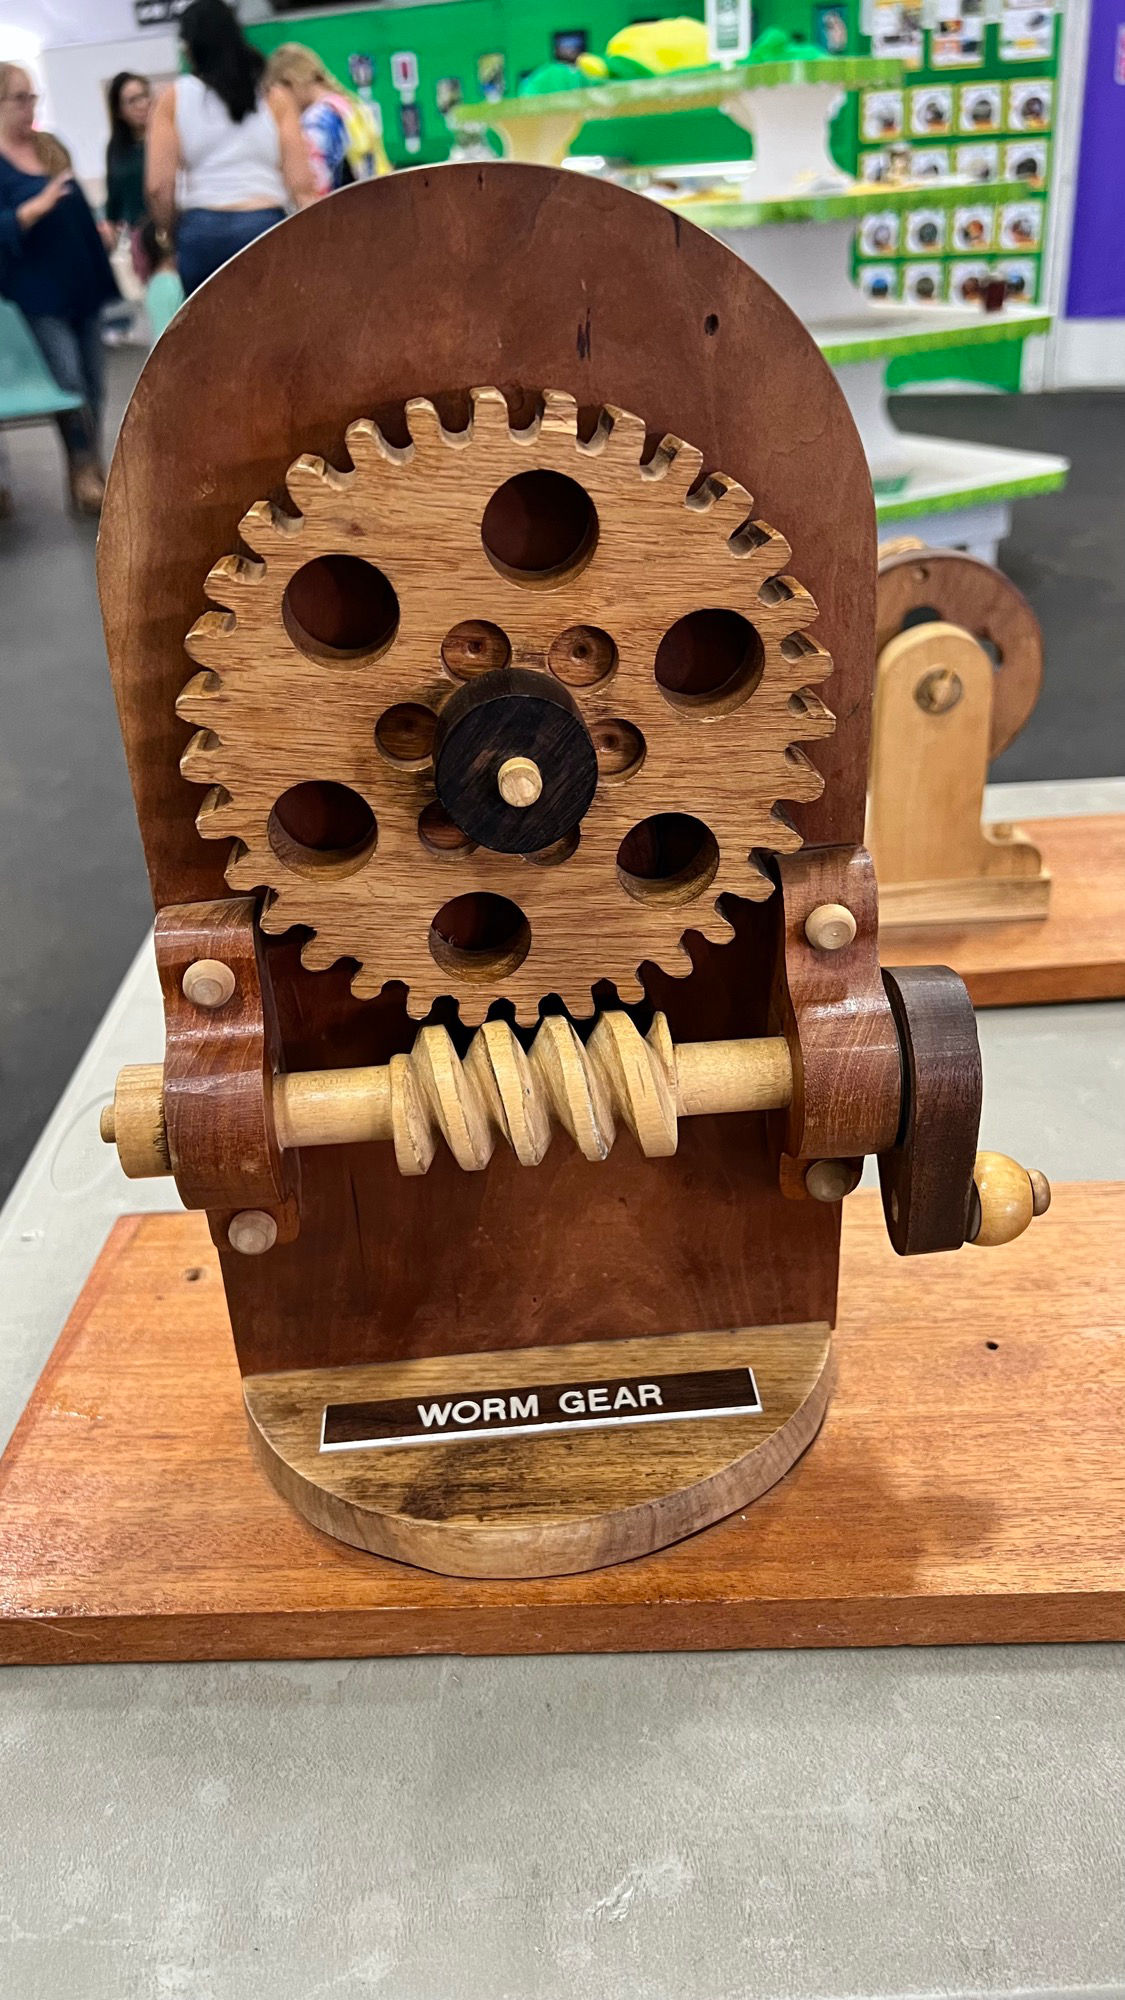 Youth Expo Worm Gear